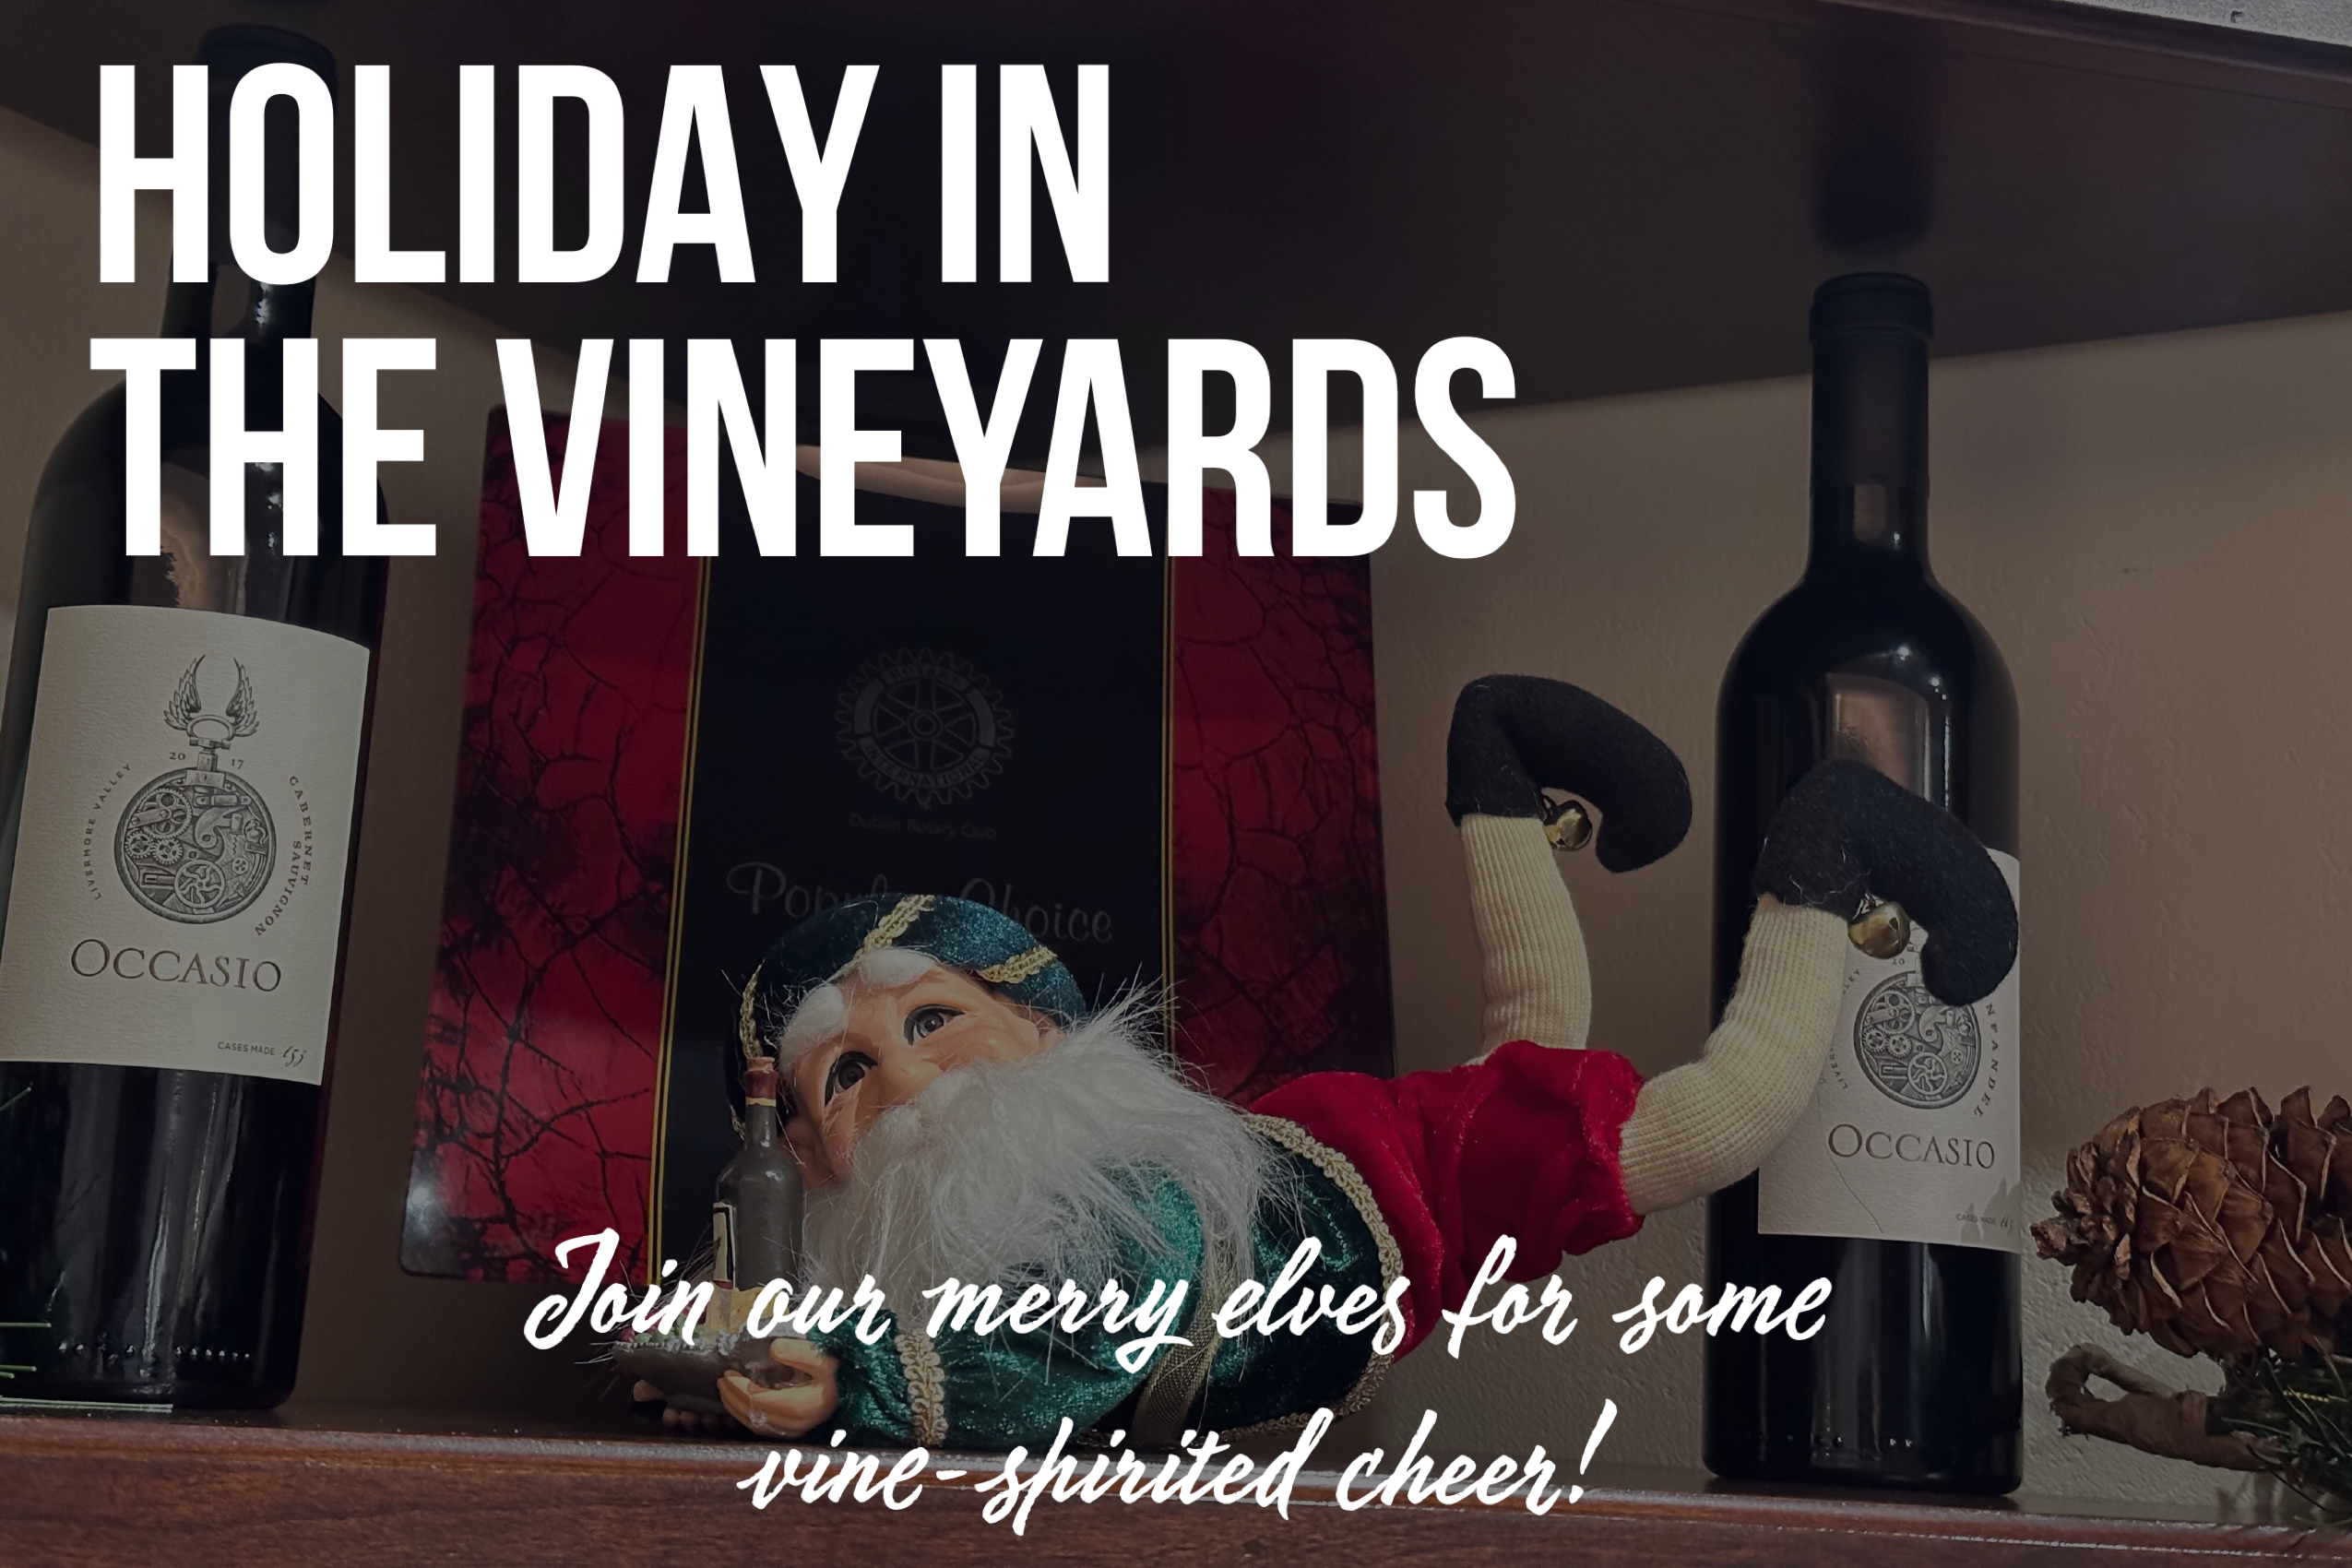 holiday in the vineyards photo showing our toy elf between two wine bottles on a display shelf